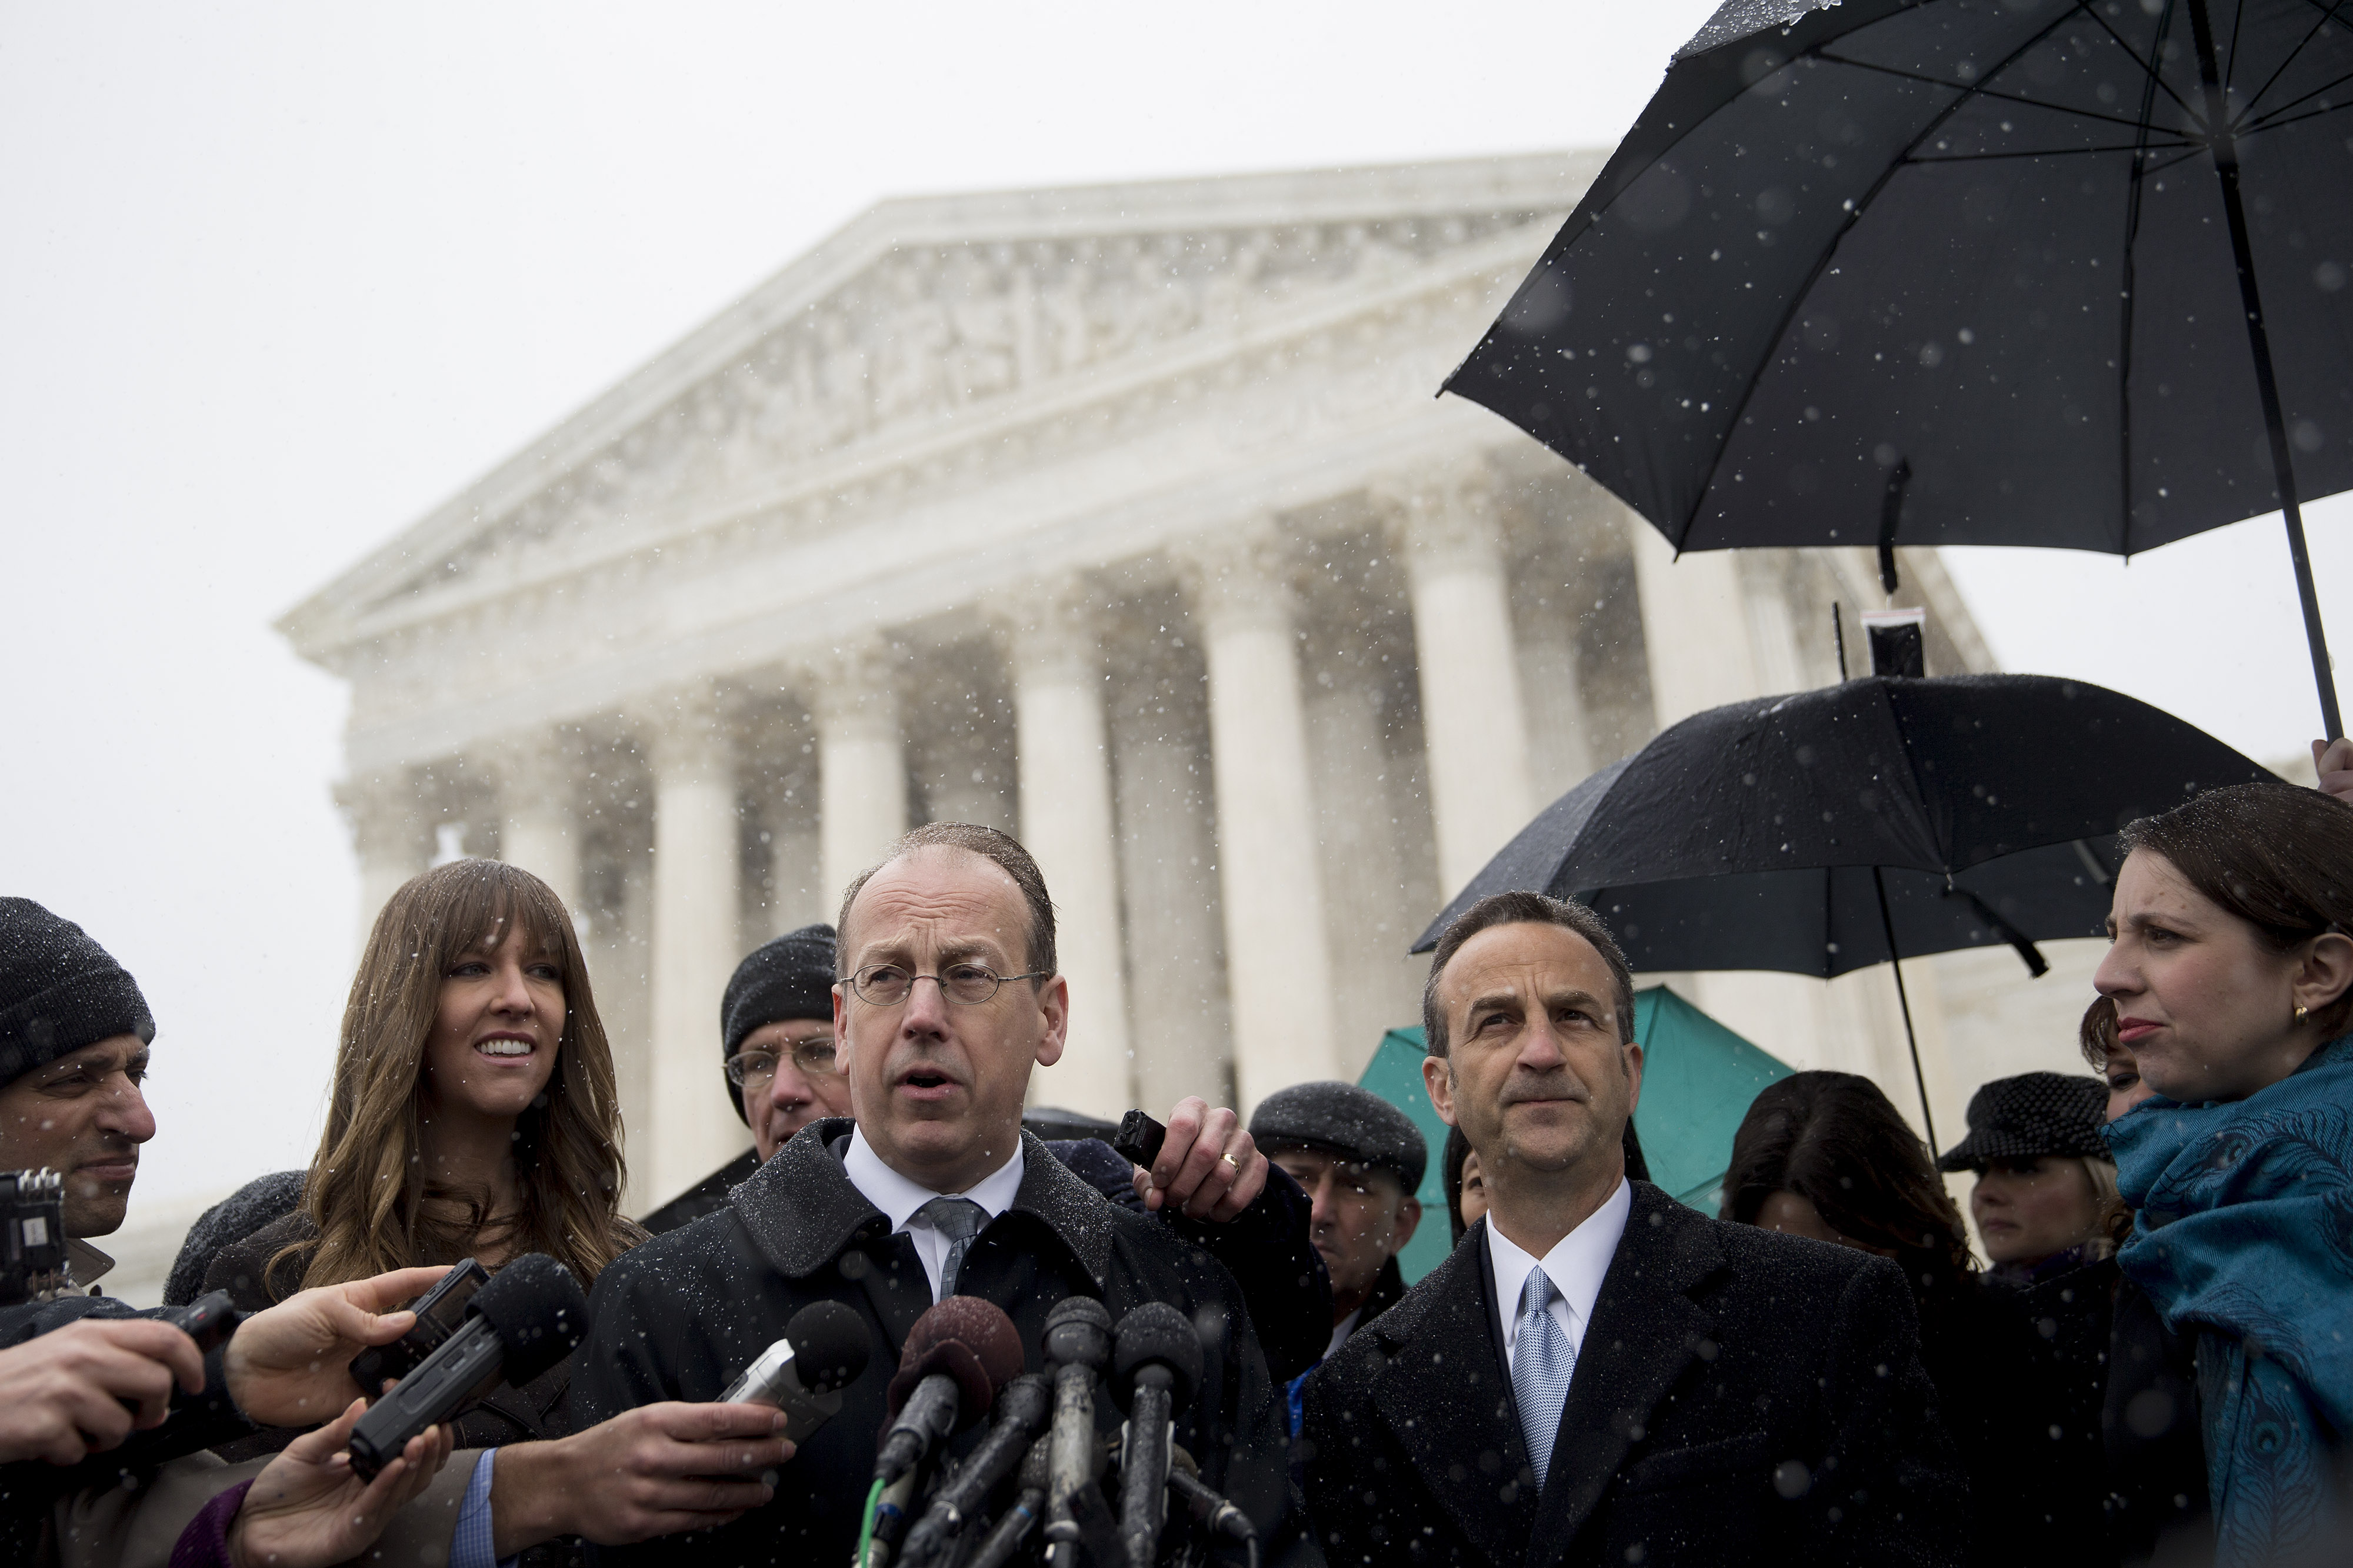 Paul Clement, lawyer arguing before the U.S. Supreme Court on behalf of Hobby Lobby Stores Inc. and Conestoga Wood Specialties Corp., center, speaks to the media with David Cortman, senior counsel and vice-president of religious liberty with Alliance Defending Freedom, right, following arguments in Washington, D.C., U.S., on Tuesday, March 25, 2014. (Bloomberg&mdash;Bloomberg via Getty Images)